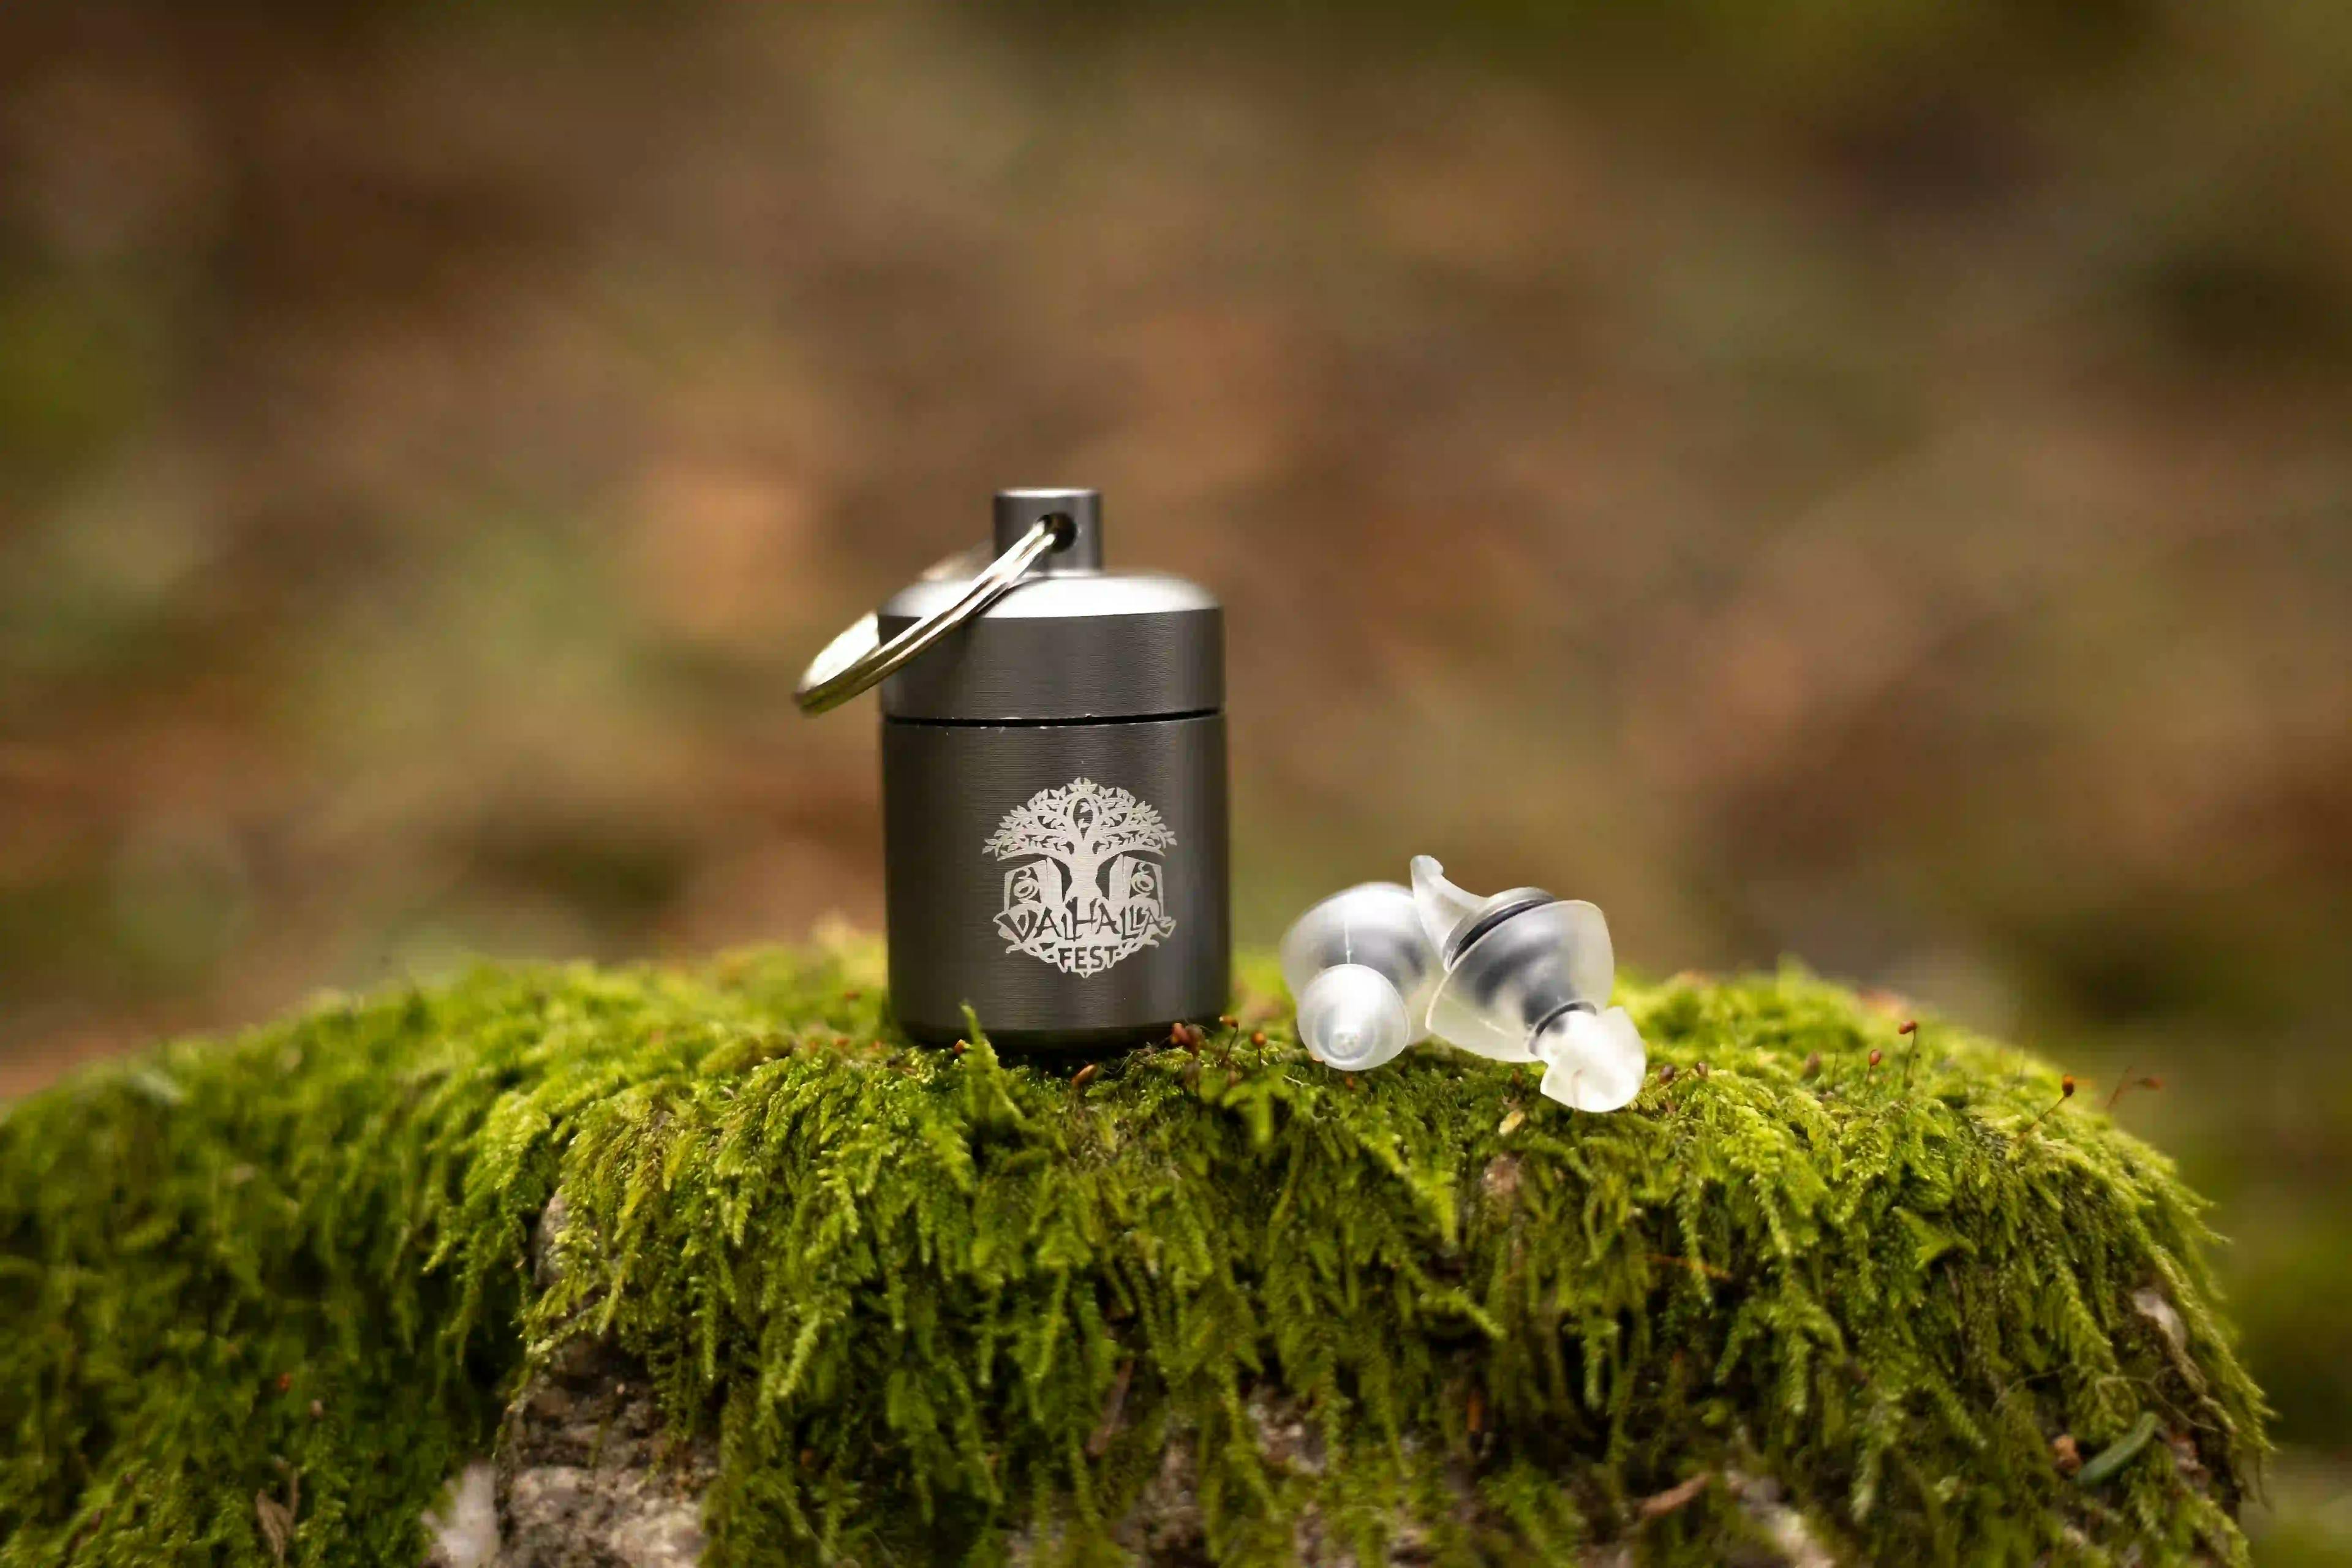 ValhallaFest branded earplugs in case displayed on a mossy stone.